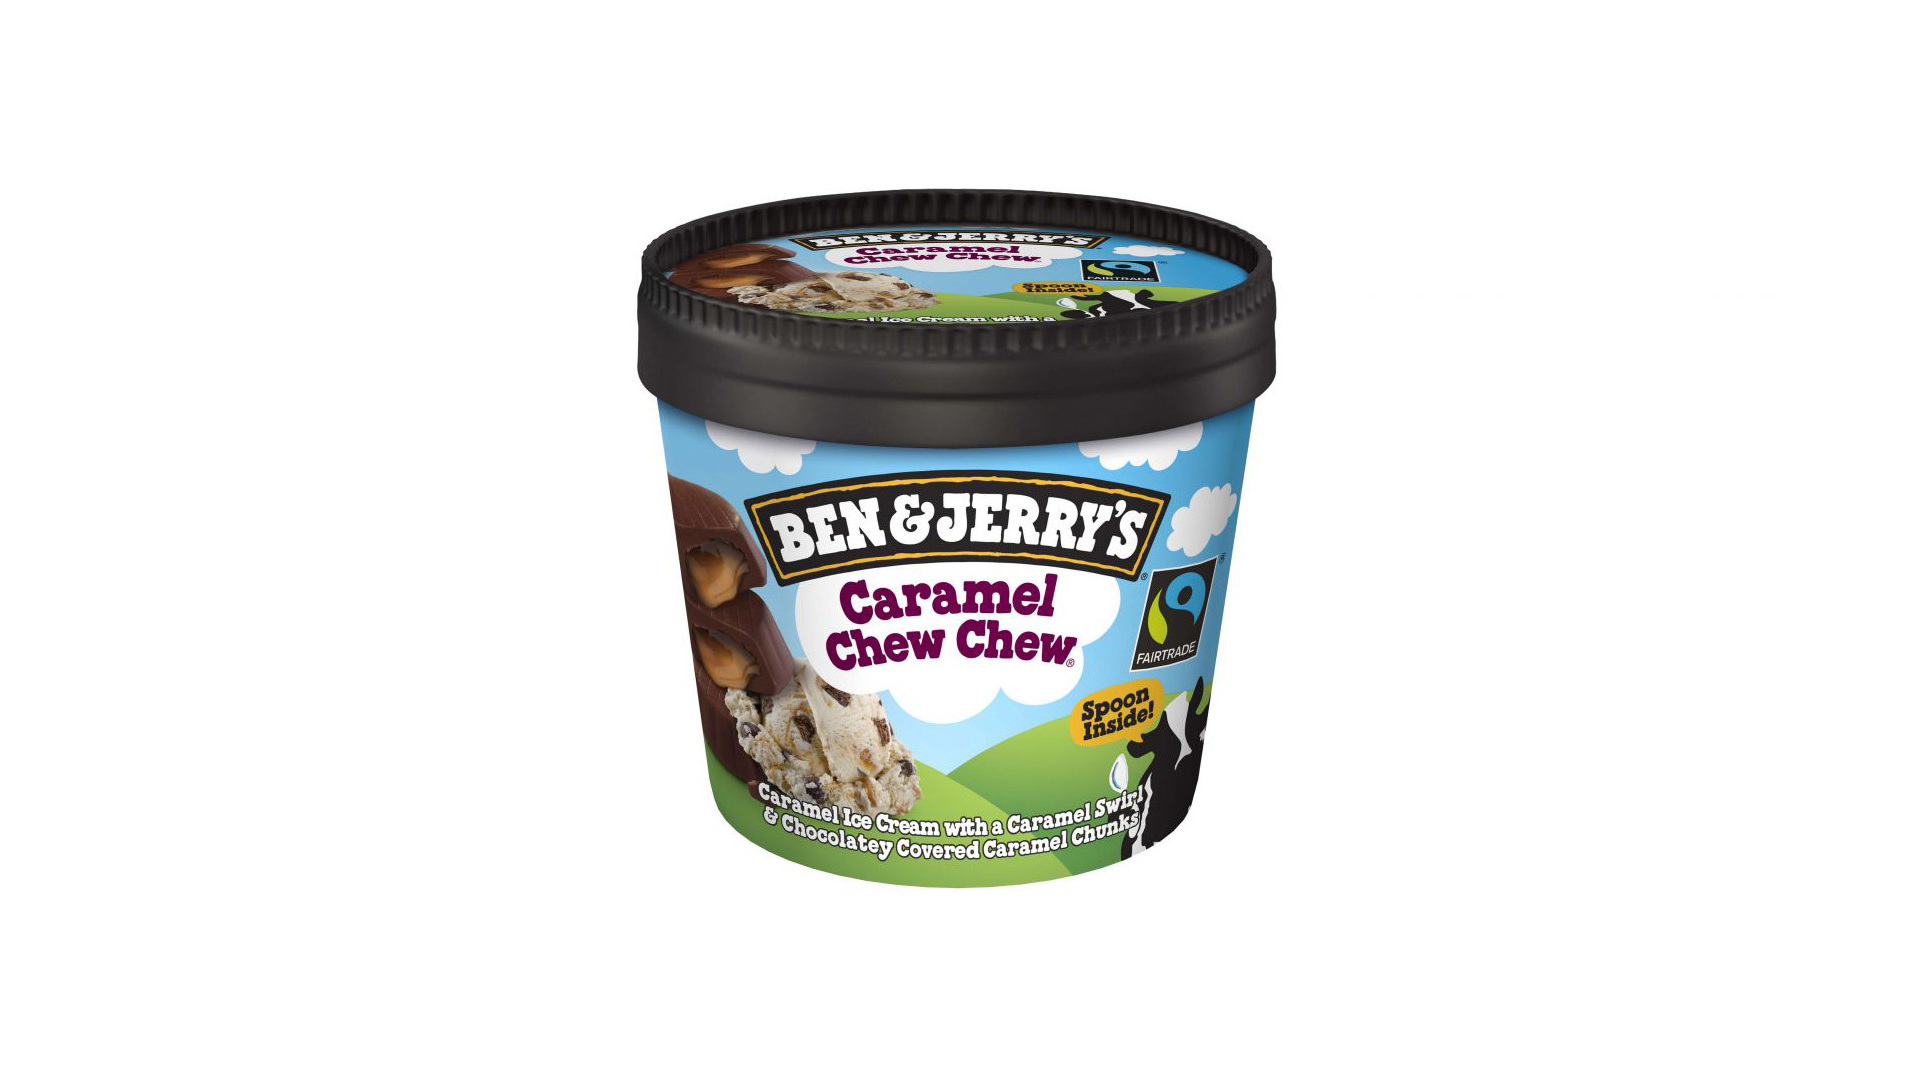 Ben & Jerry's Caramel Chew Chew 100ml - Fried Chicken Collection in Walthamstow E17